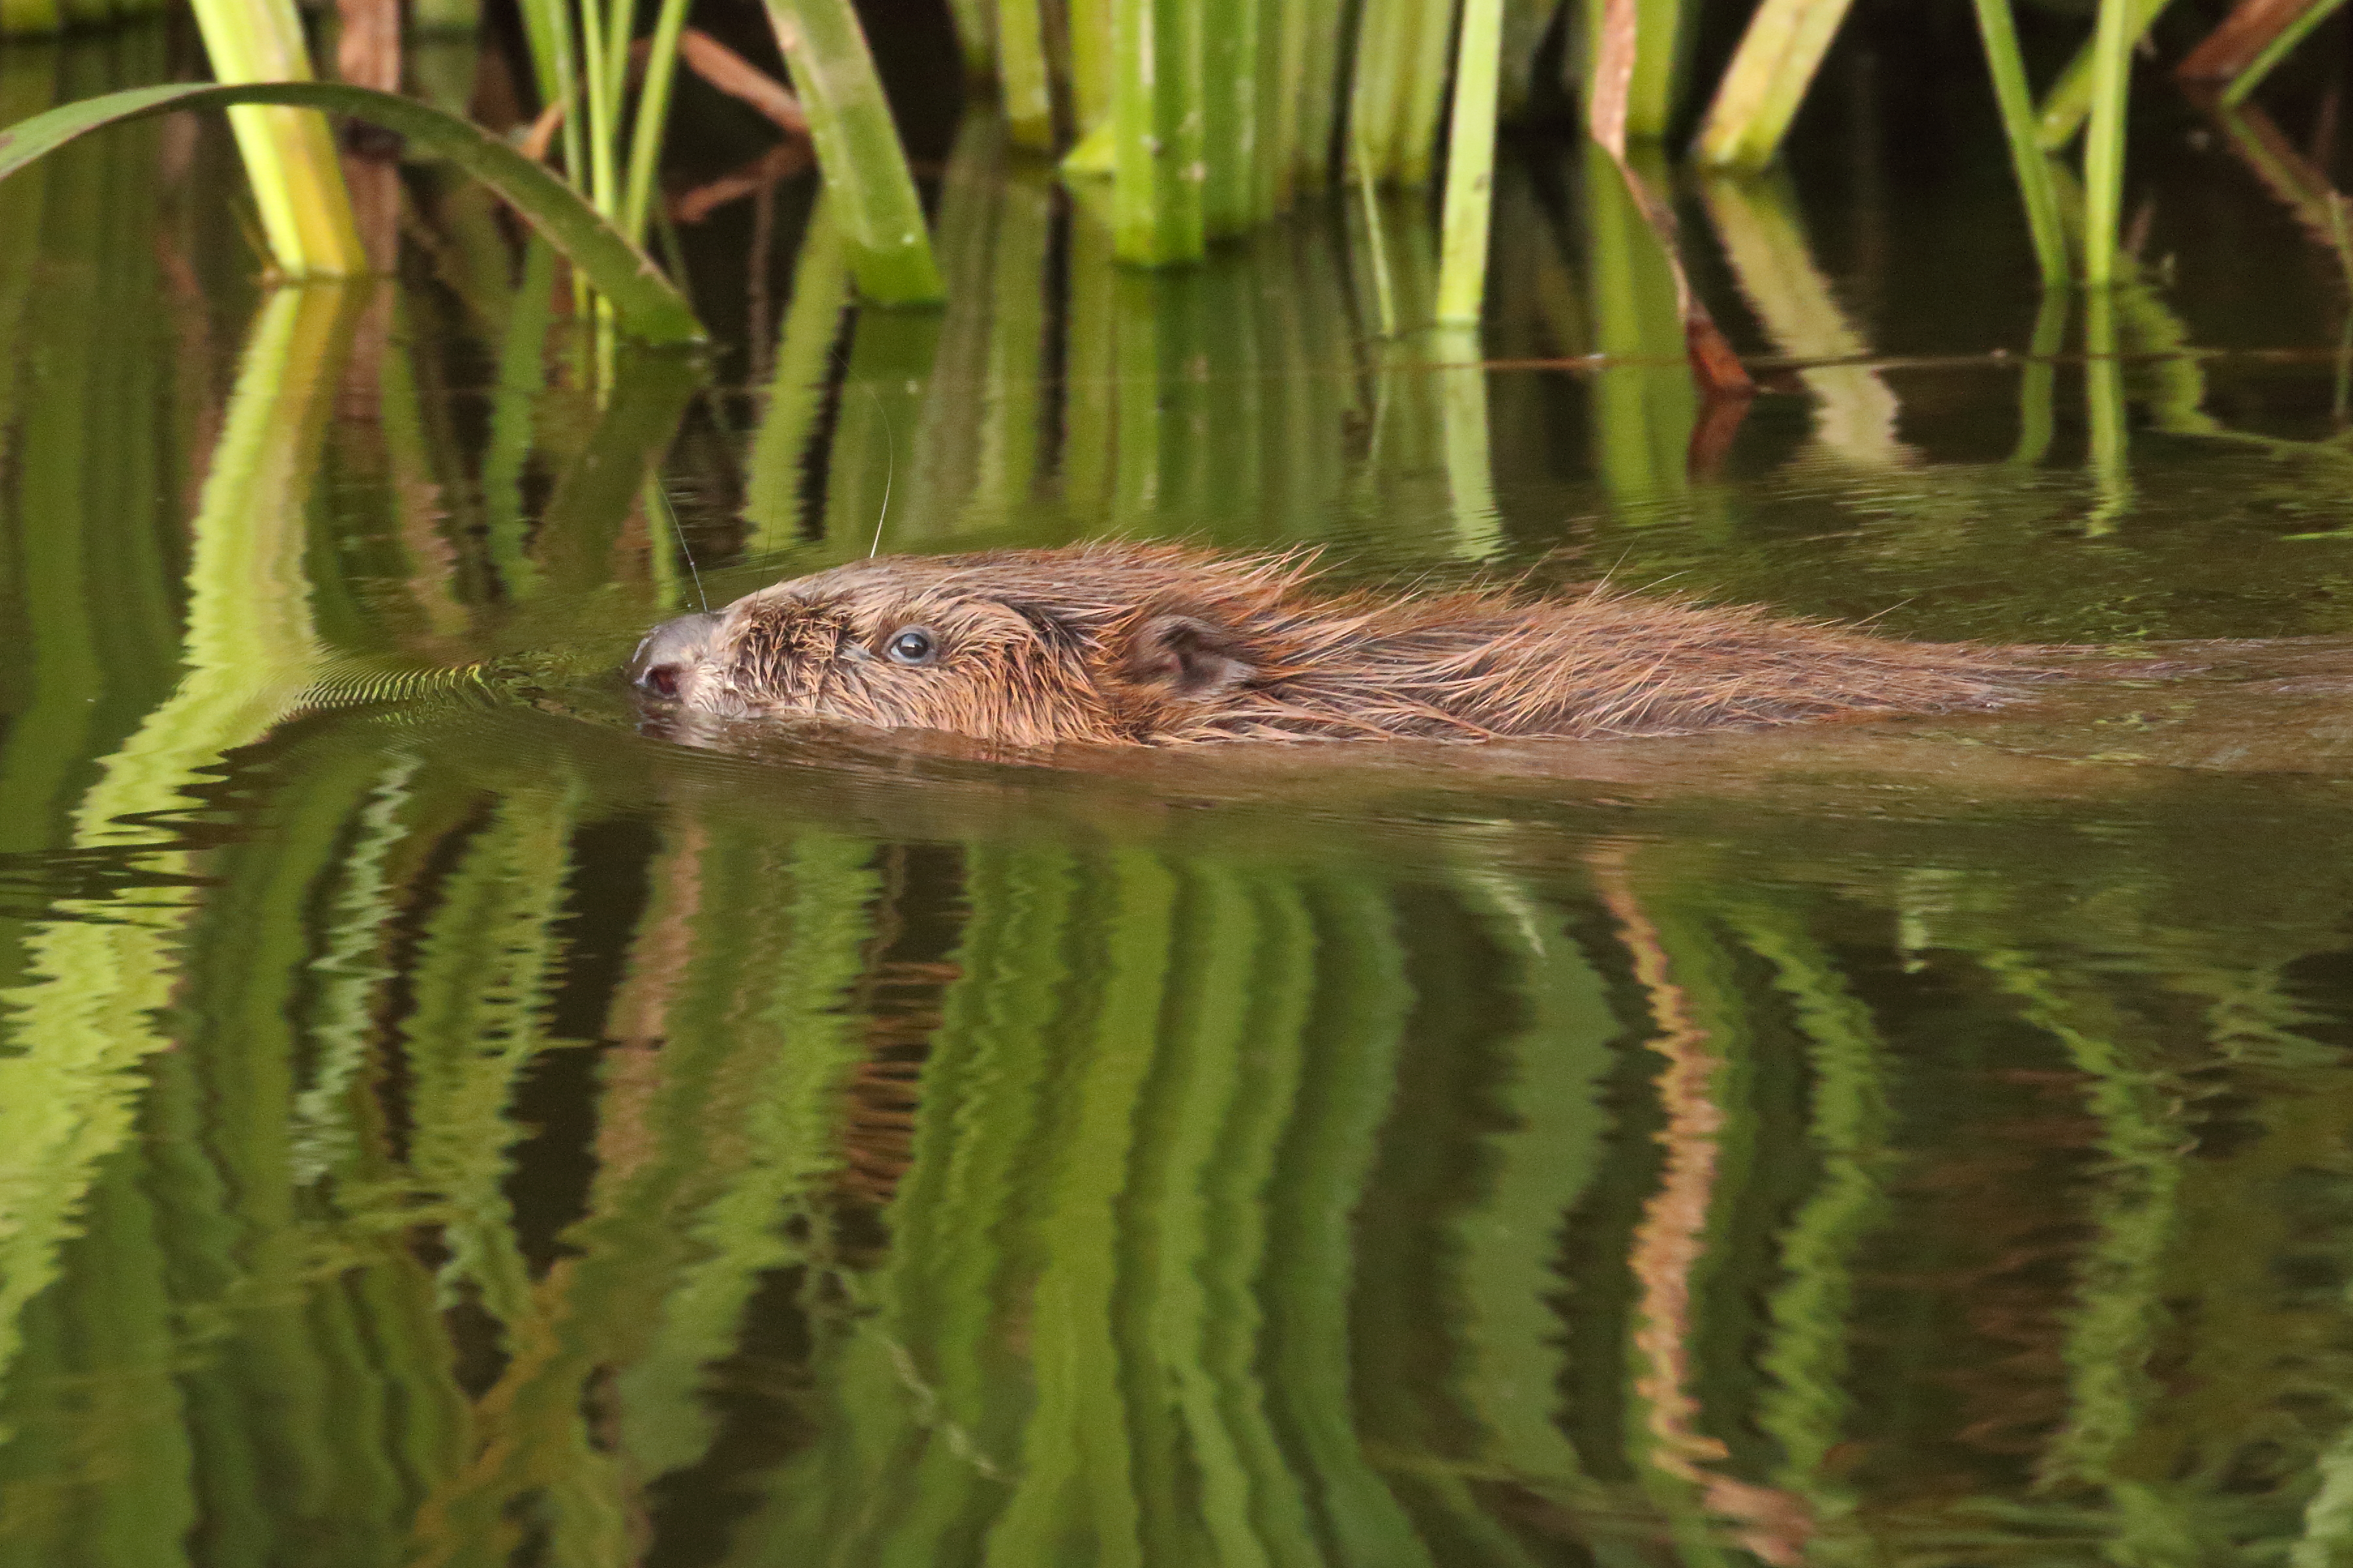 Farmers have concerns about the impact of beavers on the landscape (Michael Symes/Devon Wildlife Trust/PA)